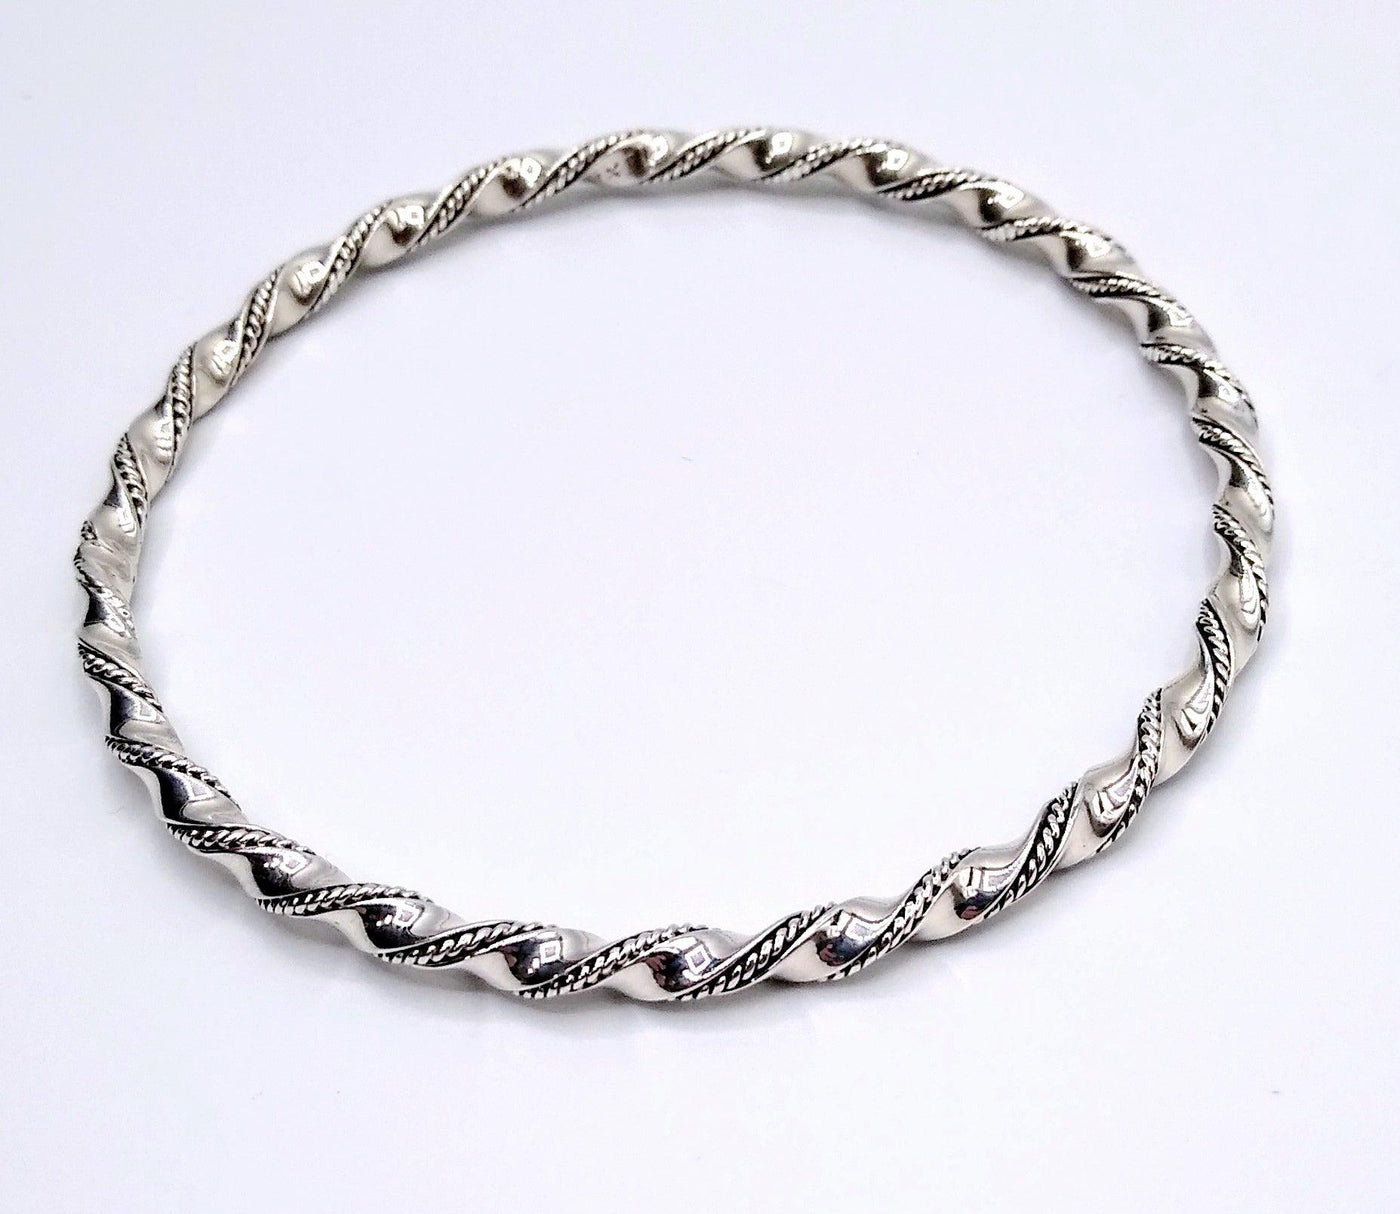 Sterling Silver Wire Twist Bangle - the silver is in a large twist pattern with a small braid pattern running between the twists